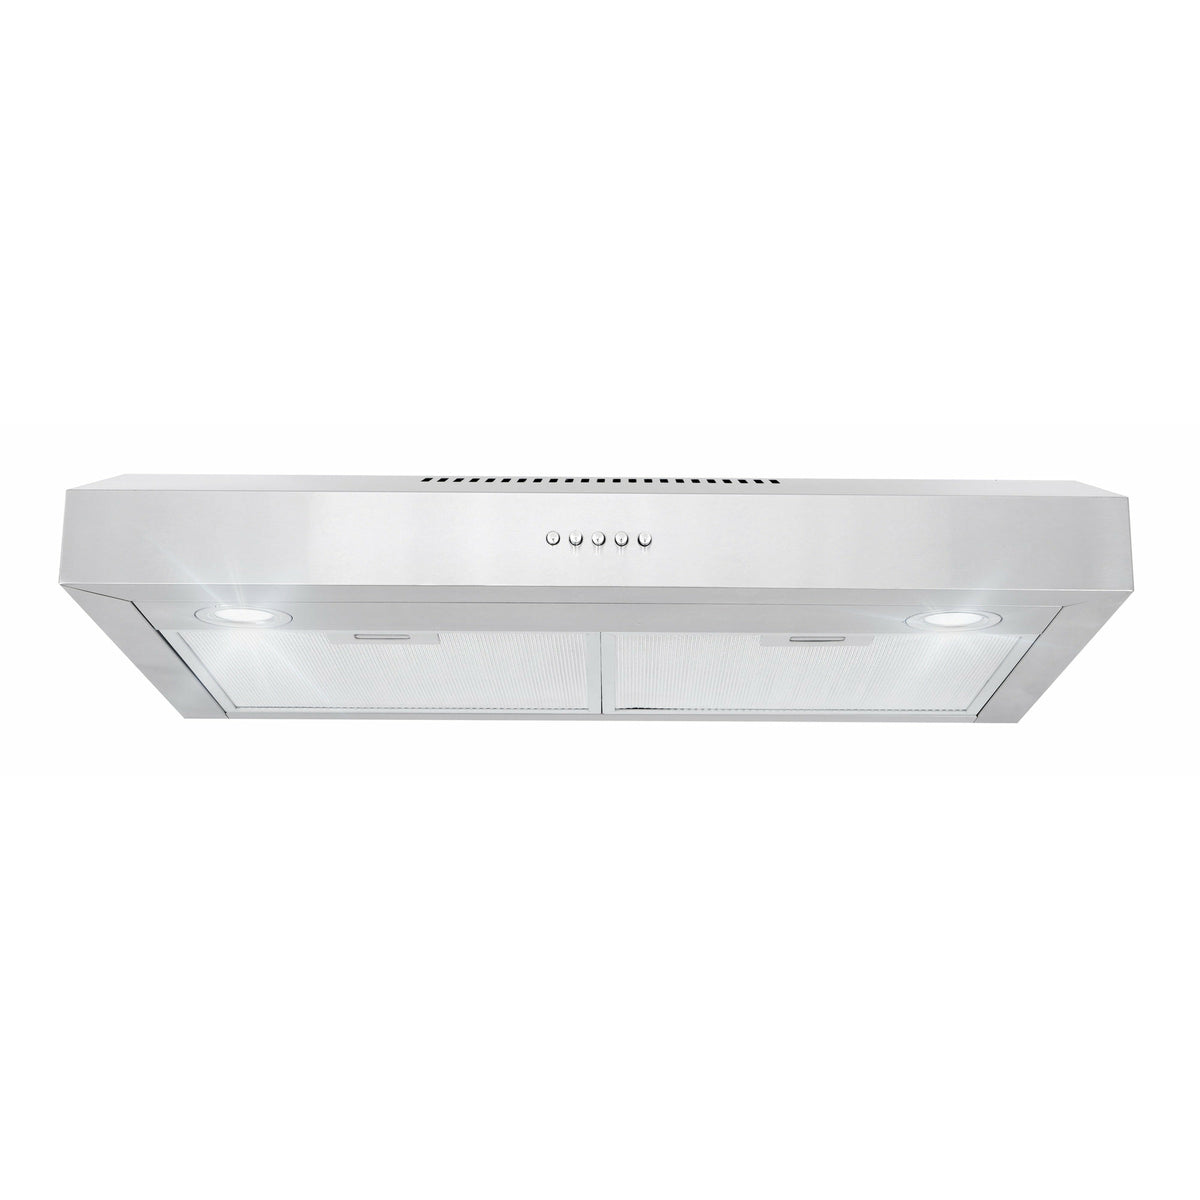 COSMO 5U30 30 in. Under Cabinet Range Hood with Ducted/Ductless Convertible  (Kit Not Included), Slim Kitchen Over Stove Vent, 3 Speed Exhaust Fan